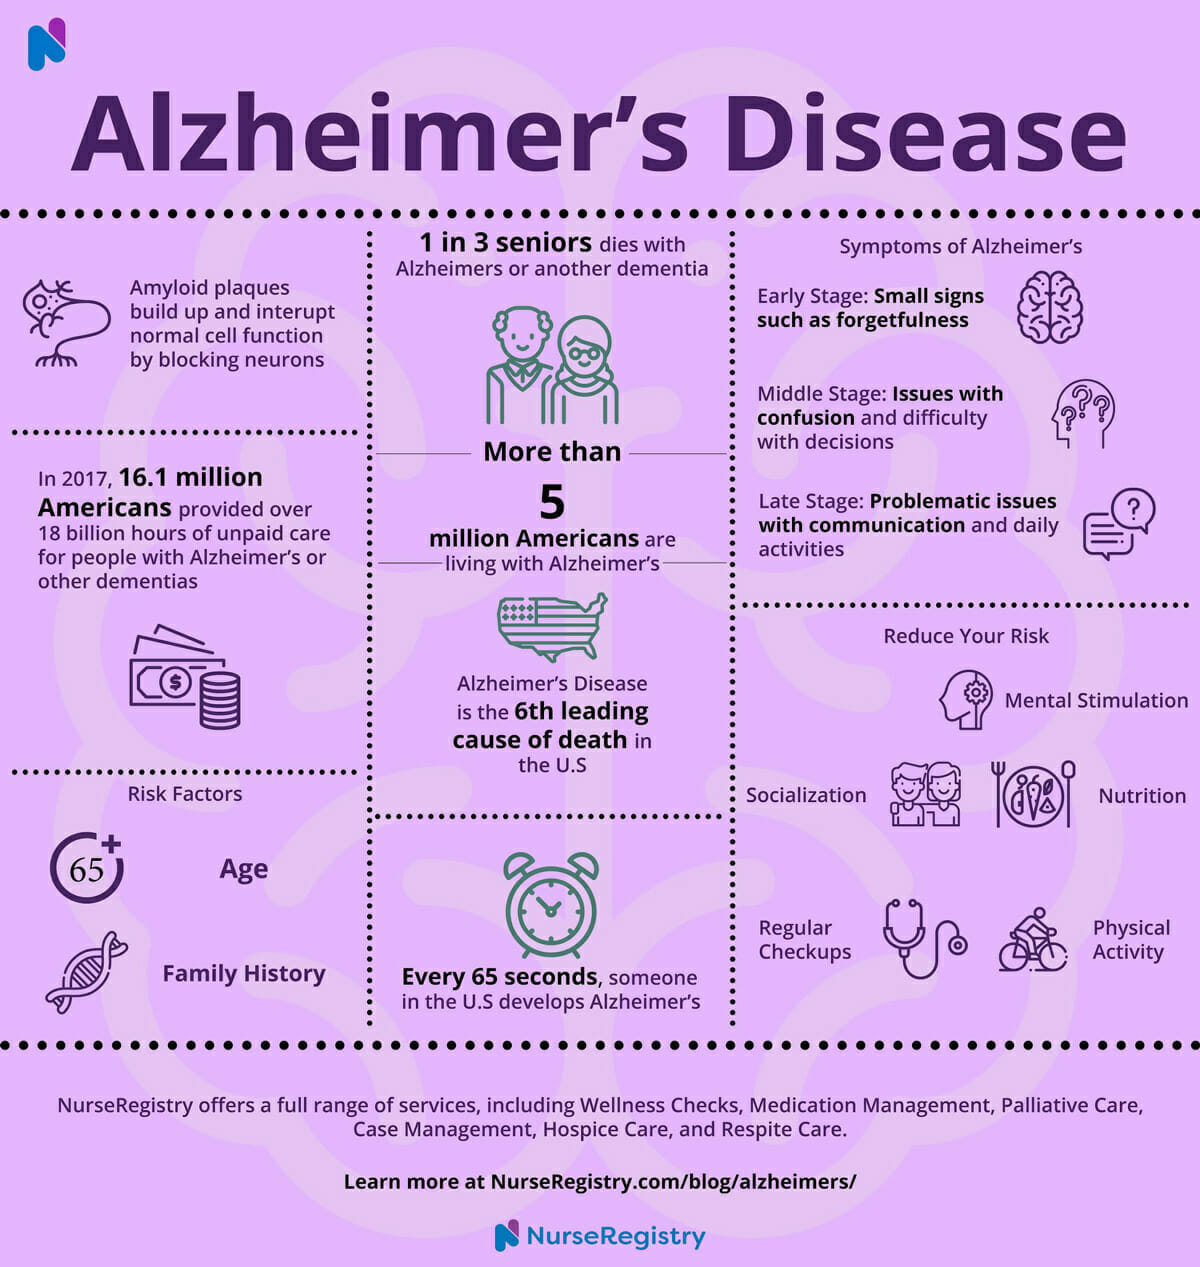 All About Alzheimer's Disease Symptoms, Causes, and Treatment